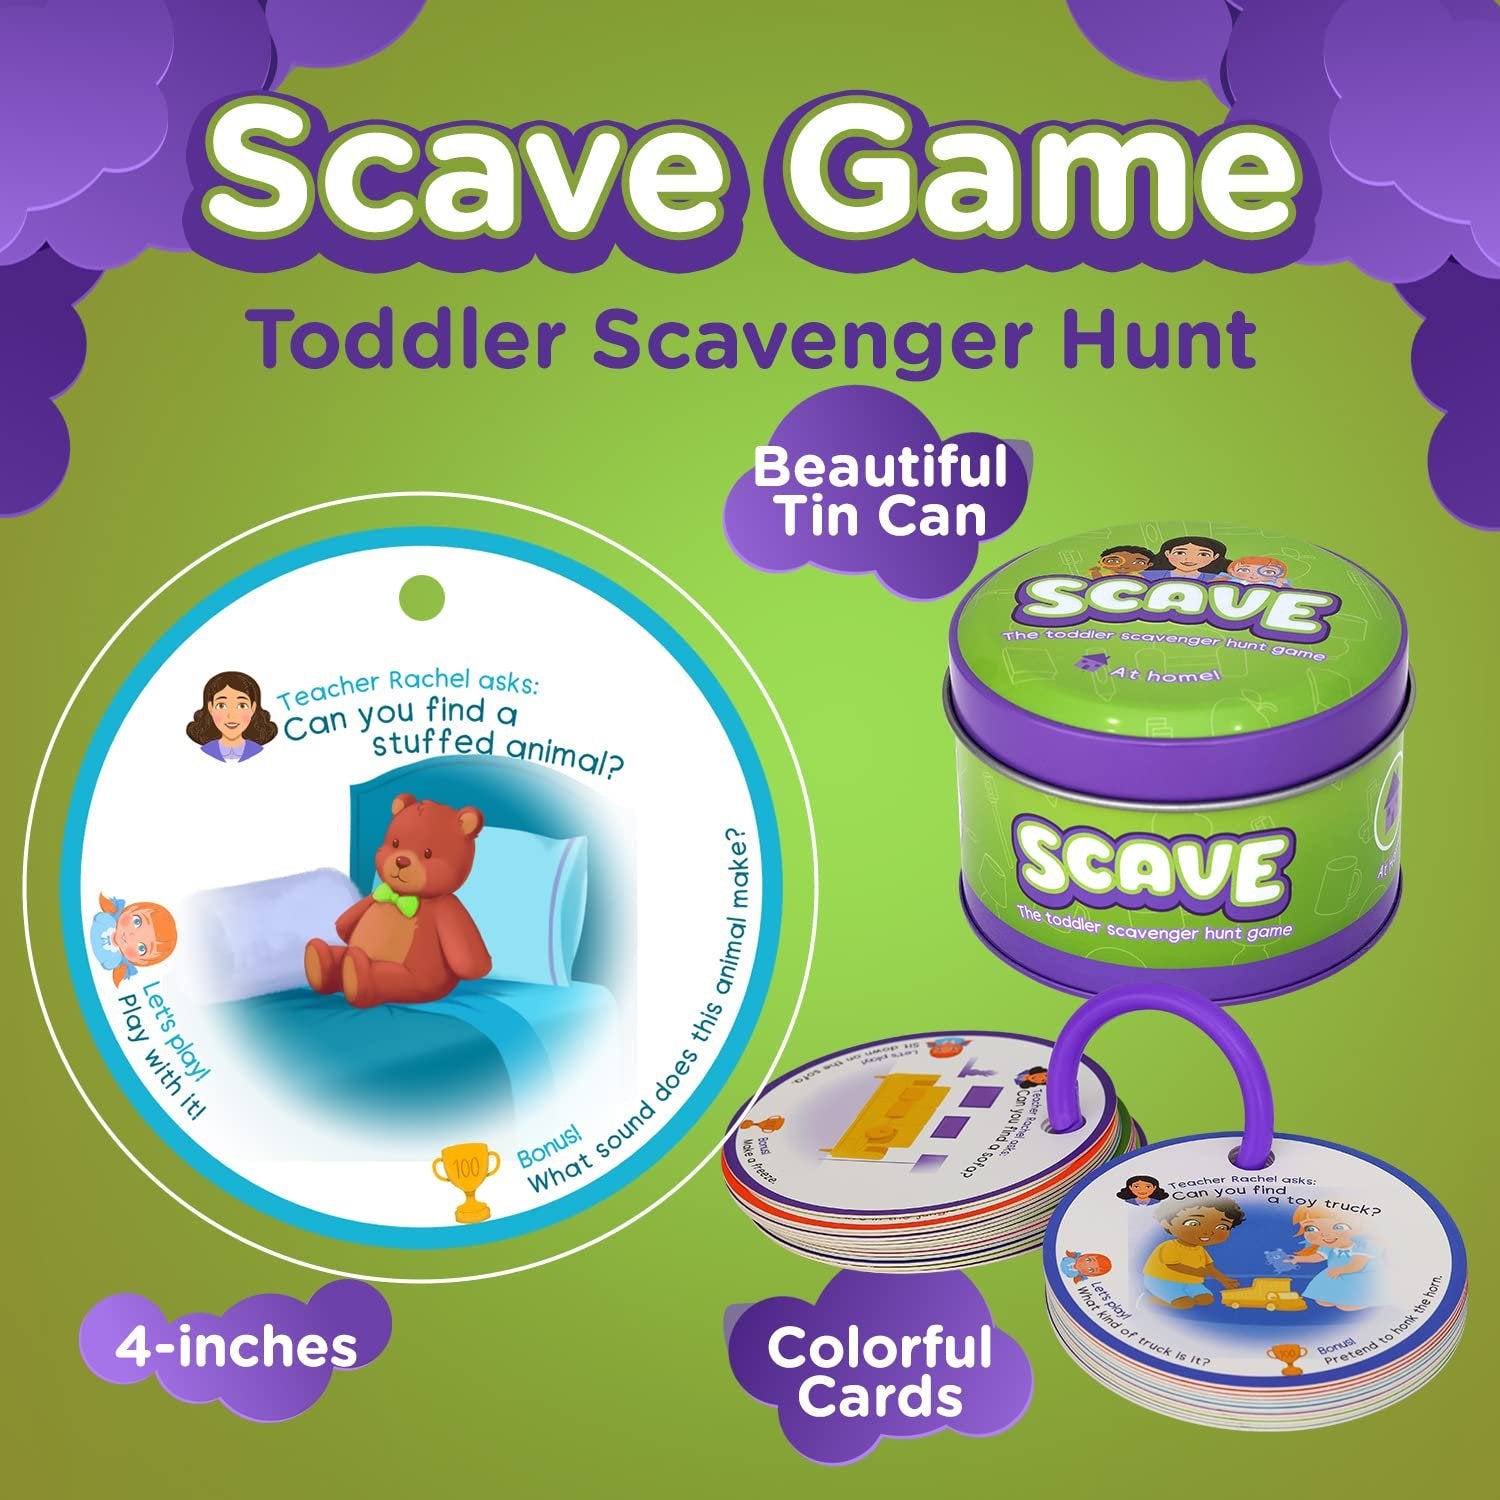 Zetz Brands Toddler Toys Trucks 2-5 Year Old Boys & Girls - Gift Your Toddler with This Fun Educational Toddler Scavenger Hunt Game at Home, Preschool Activity Toy - Extra-Thick Cards for Exploration